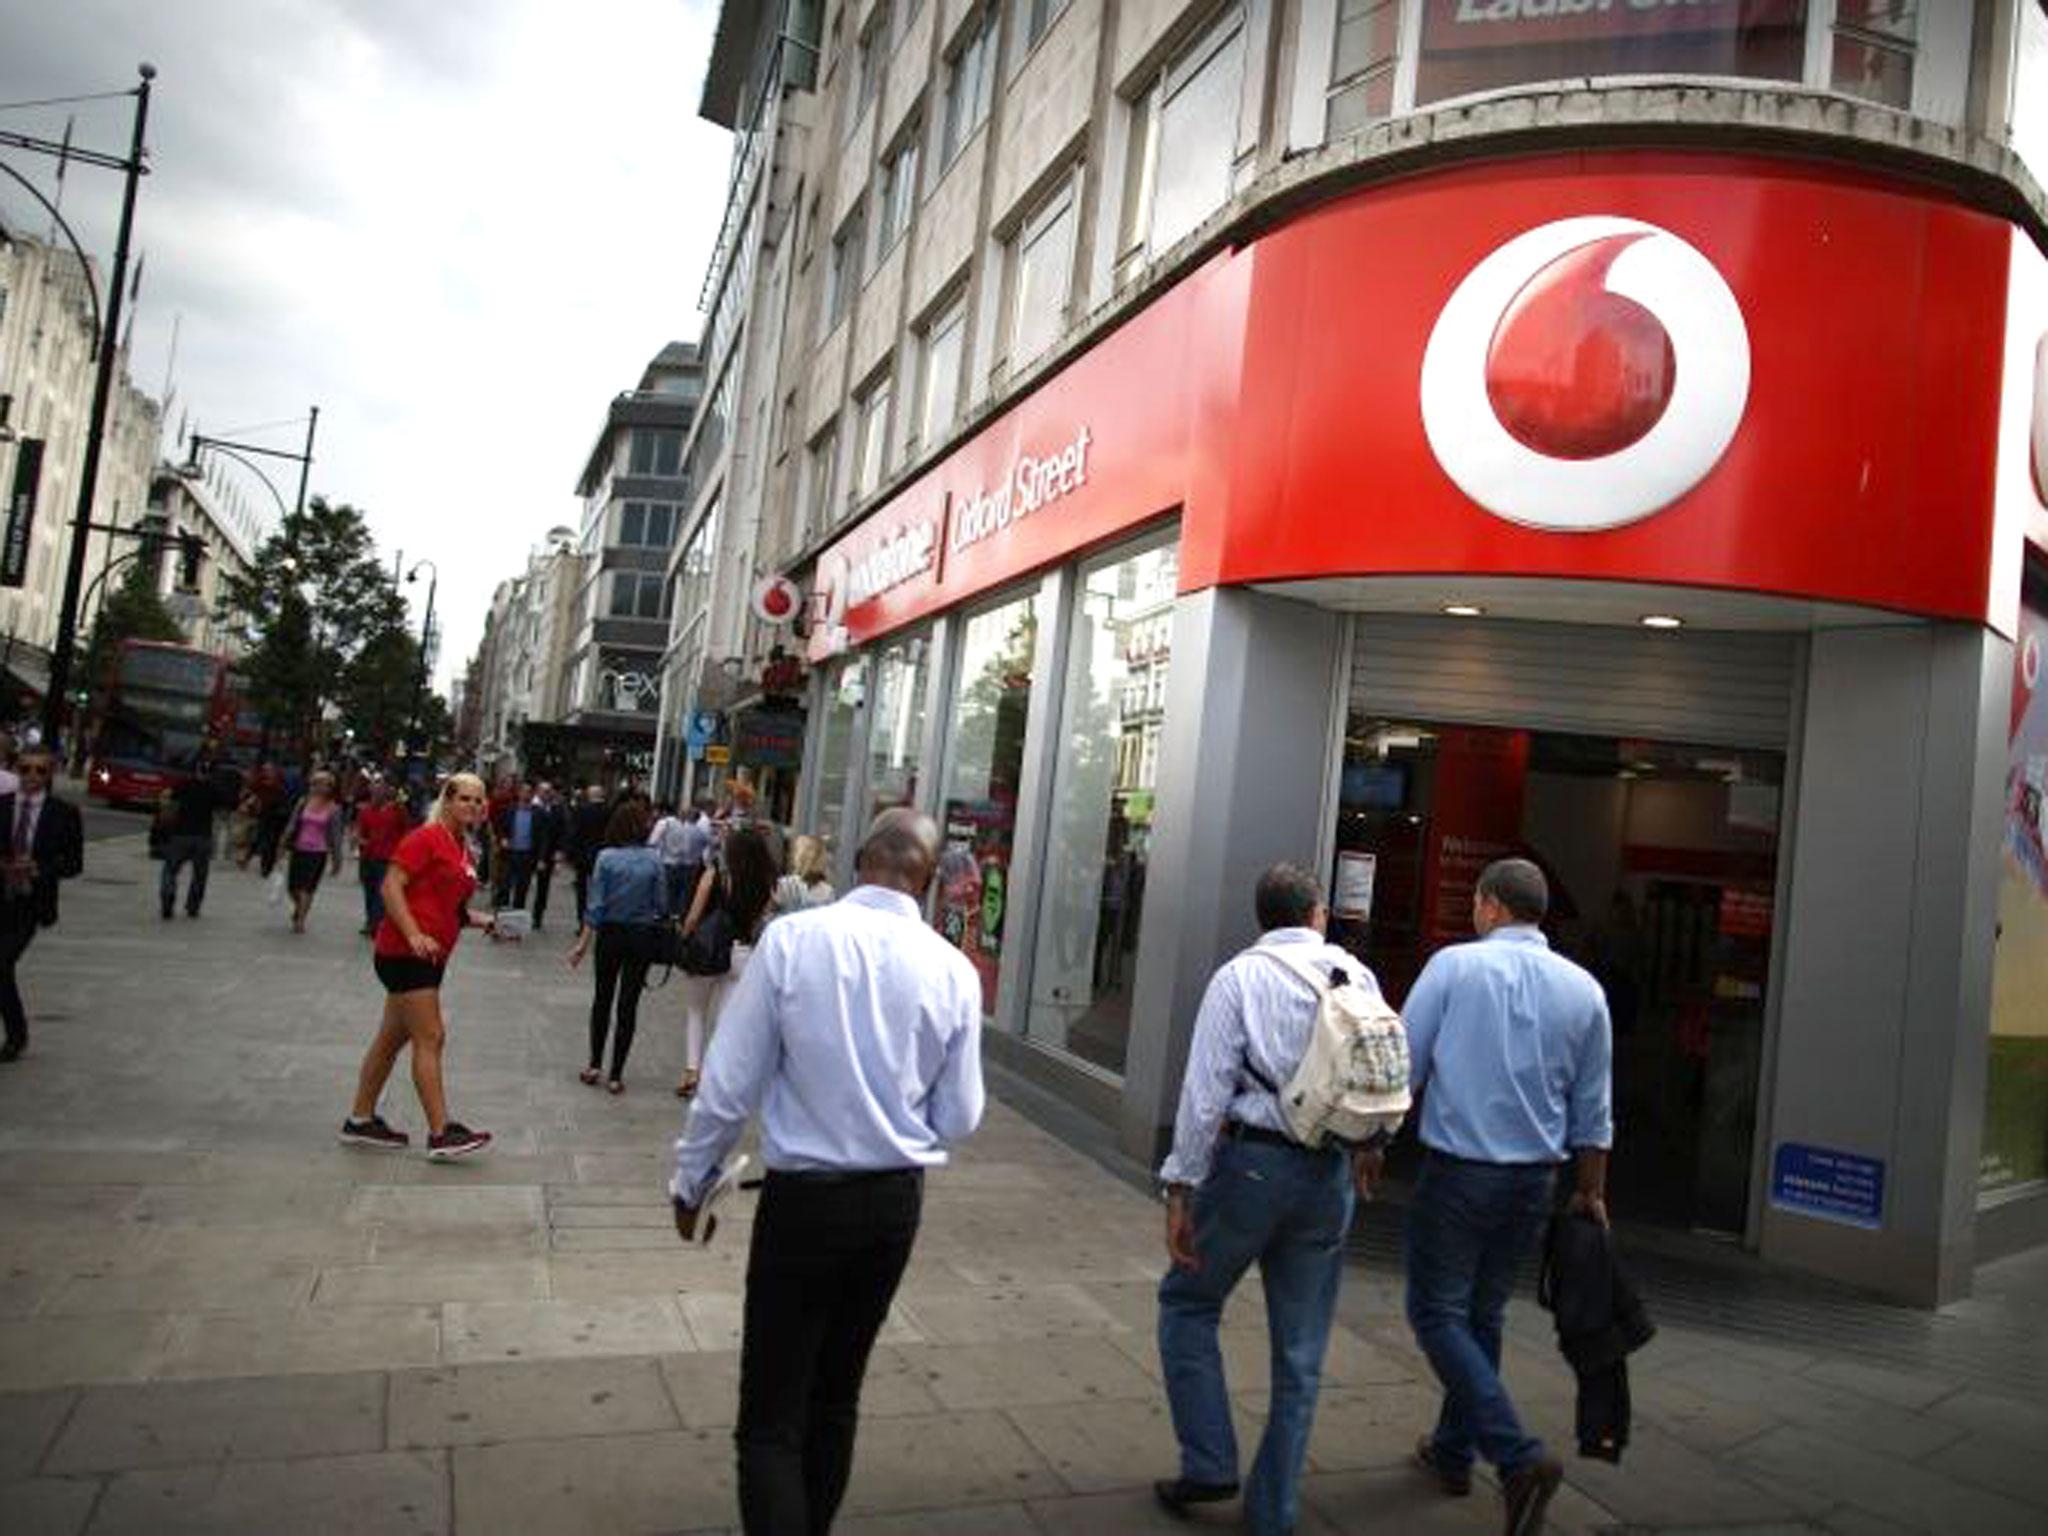 Vodafone kept failing to deliver a reader's iPhone, but it wouldn’t accept a cancellation either